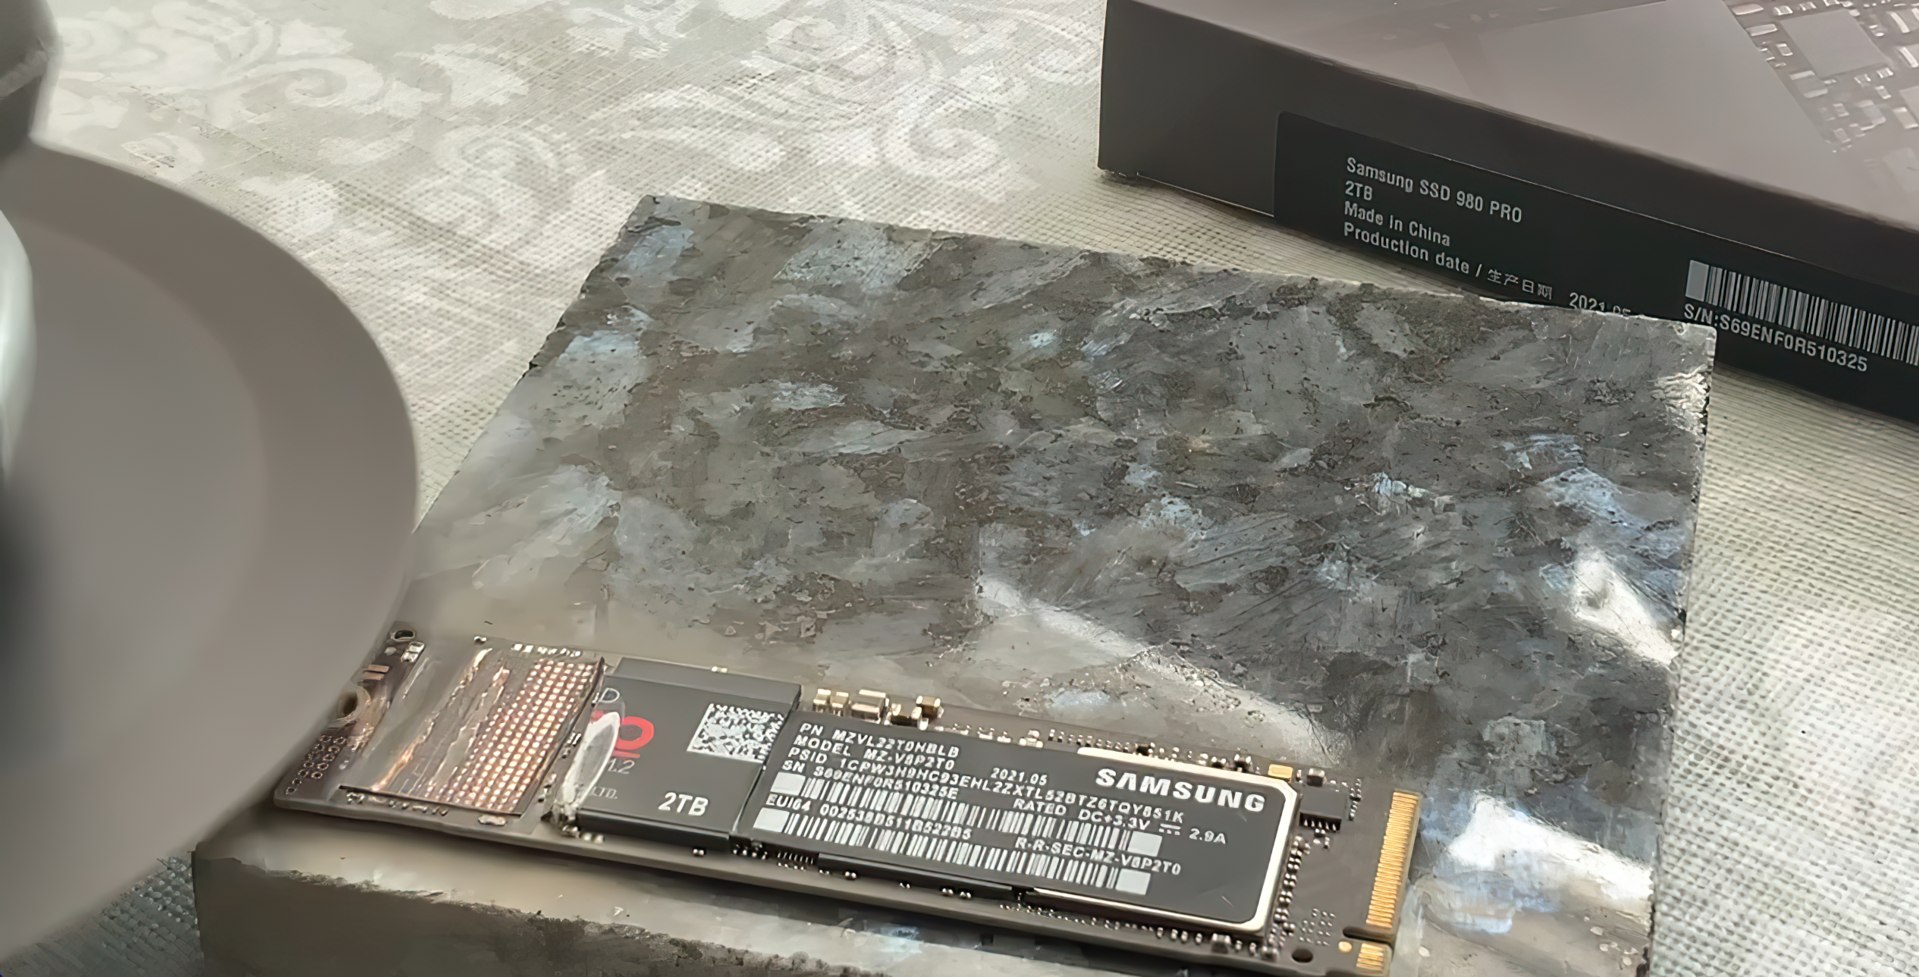 Samsung Deutschland offers the user to smash the SSD with a hammer to get a new drive under warranty